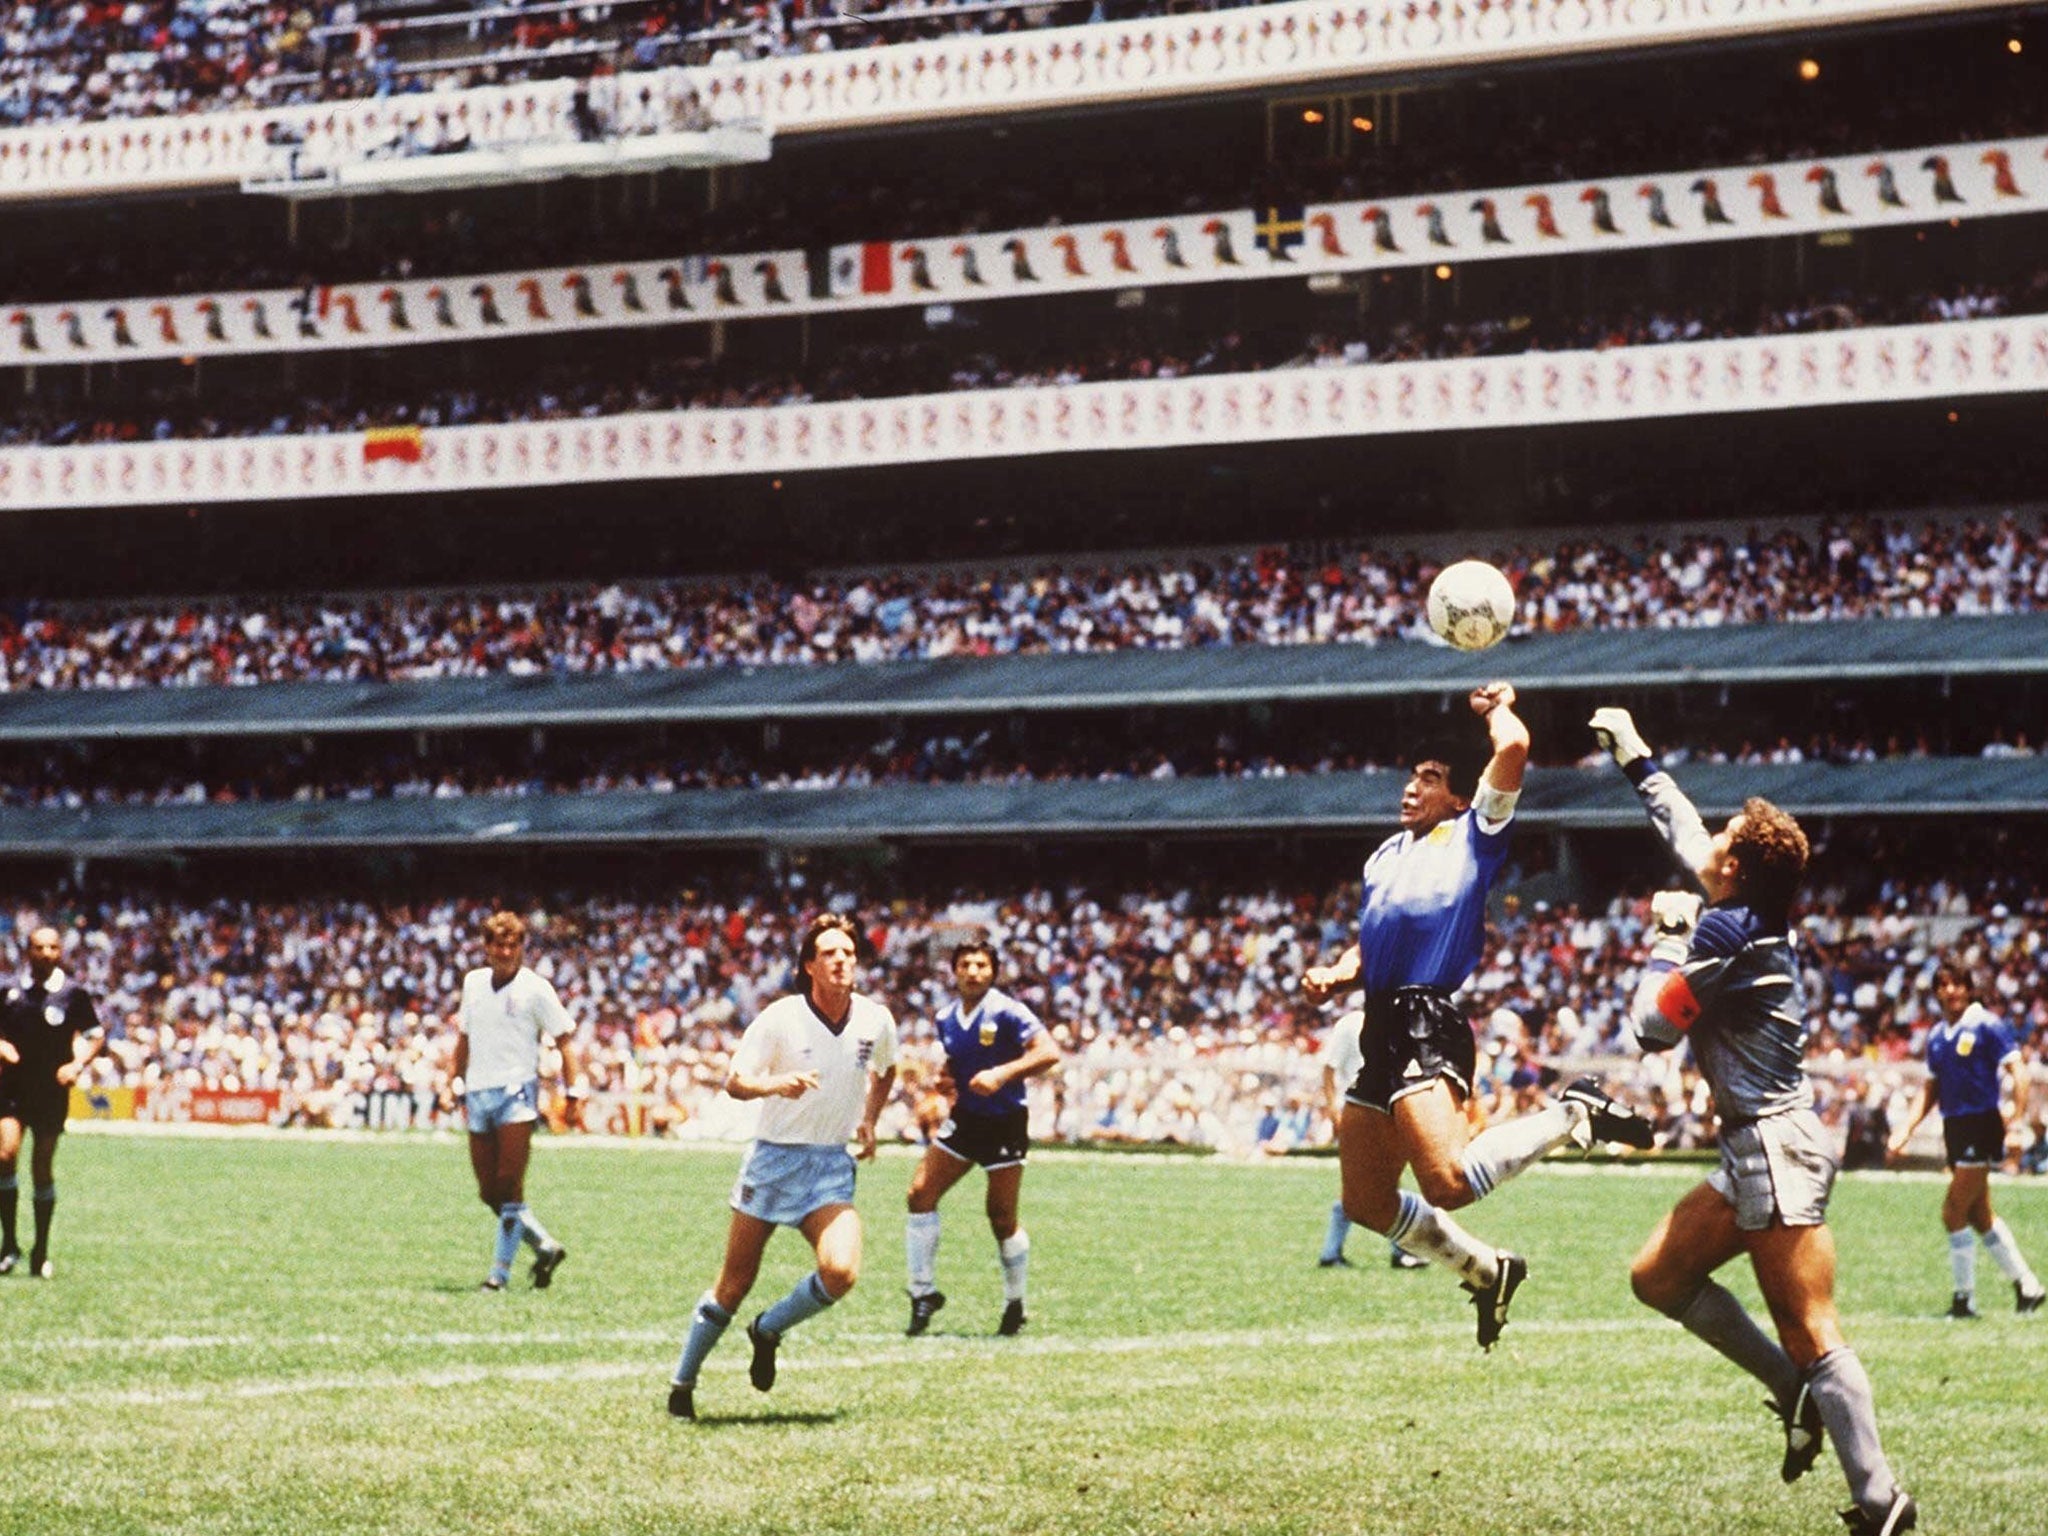 Diego Maradona gets to the ball before Peter Shilton in the World Cup quater-final